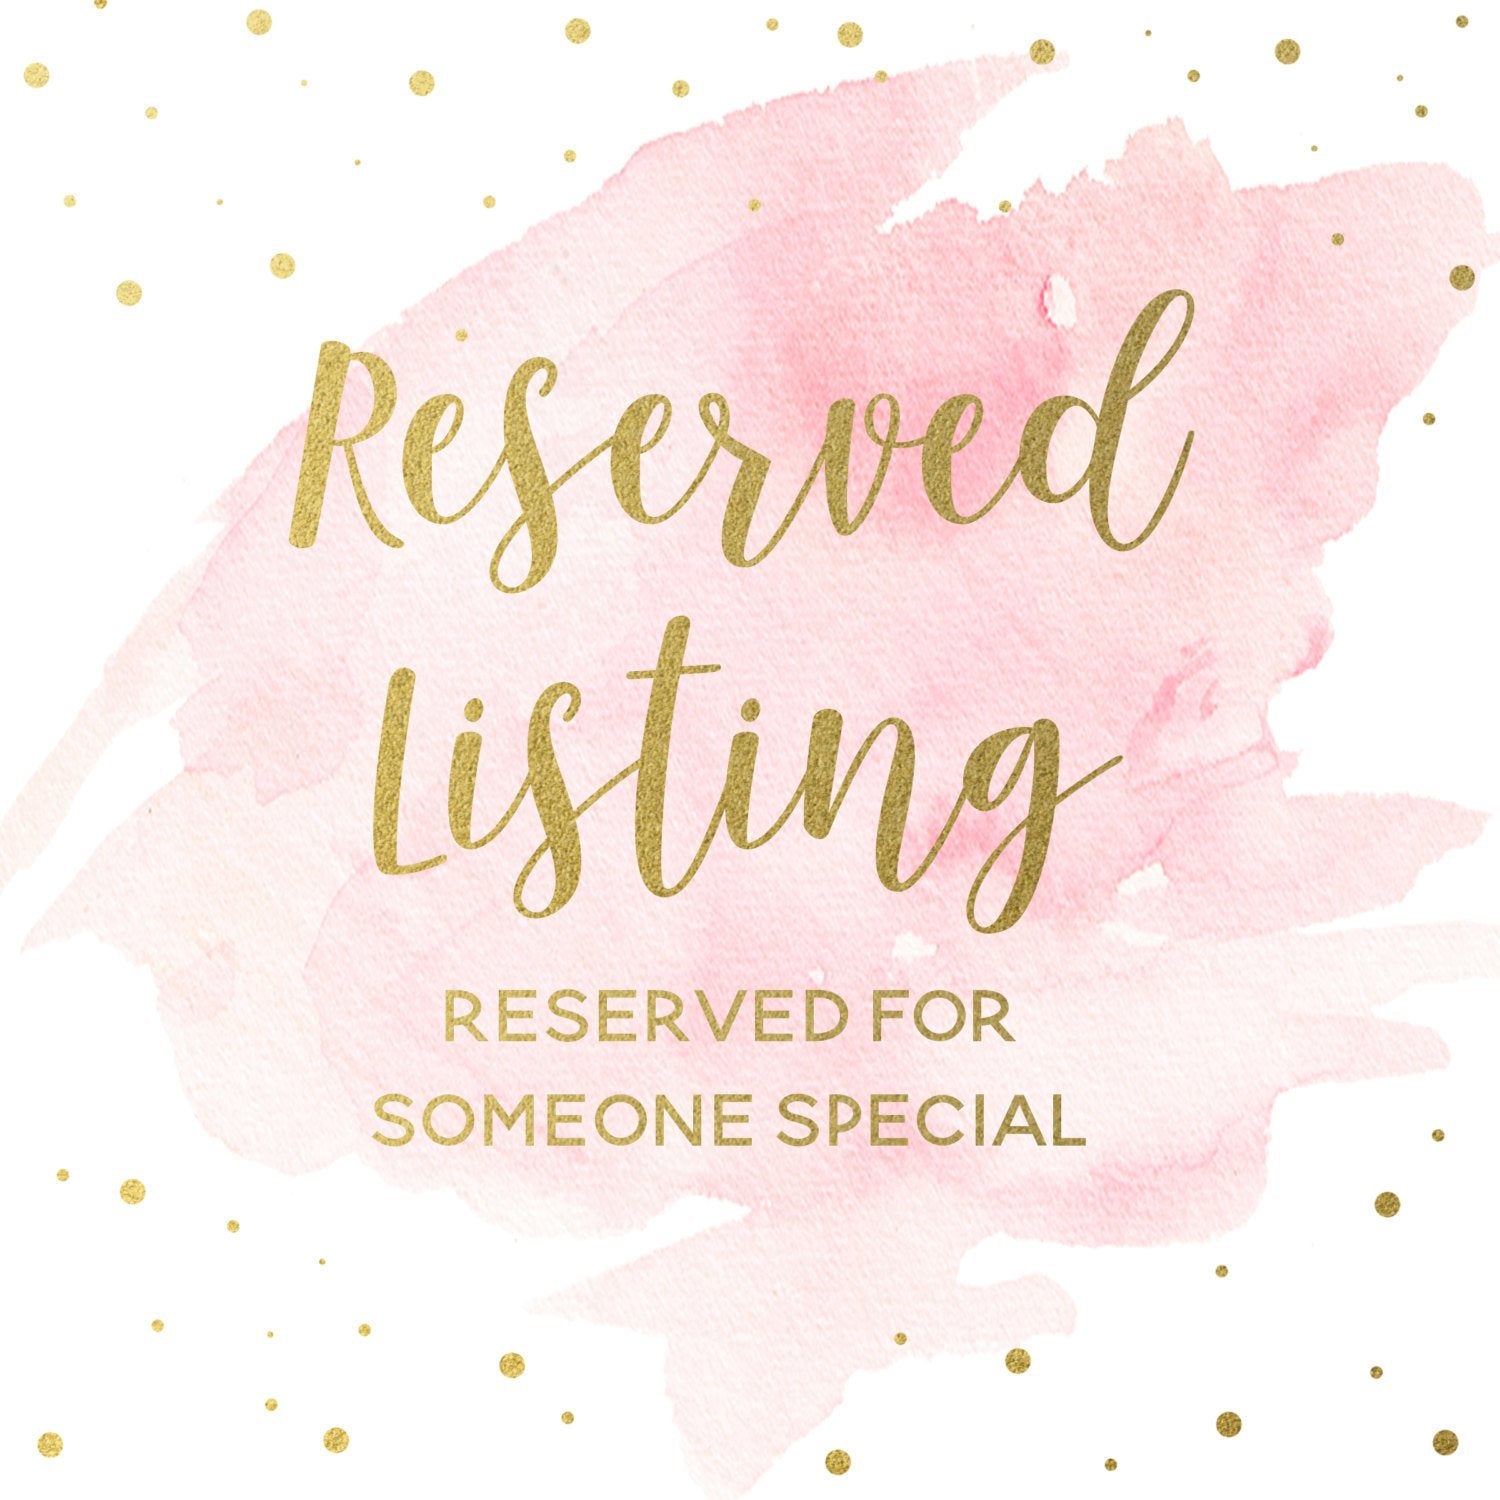 Reserved Listing - A Knutson